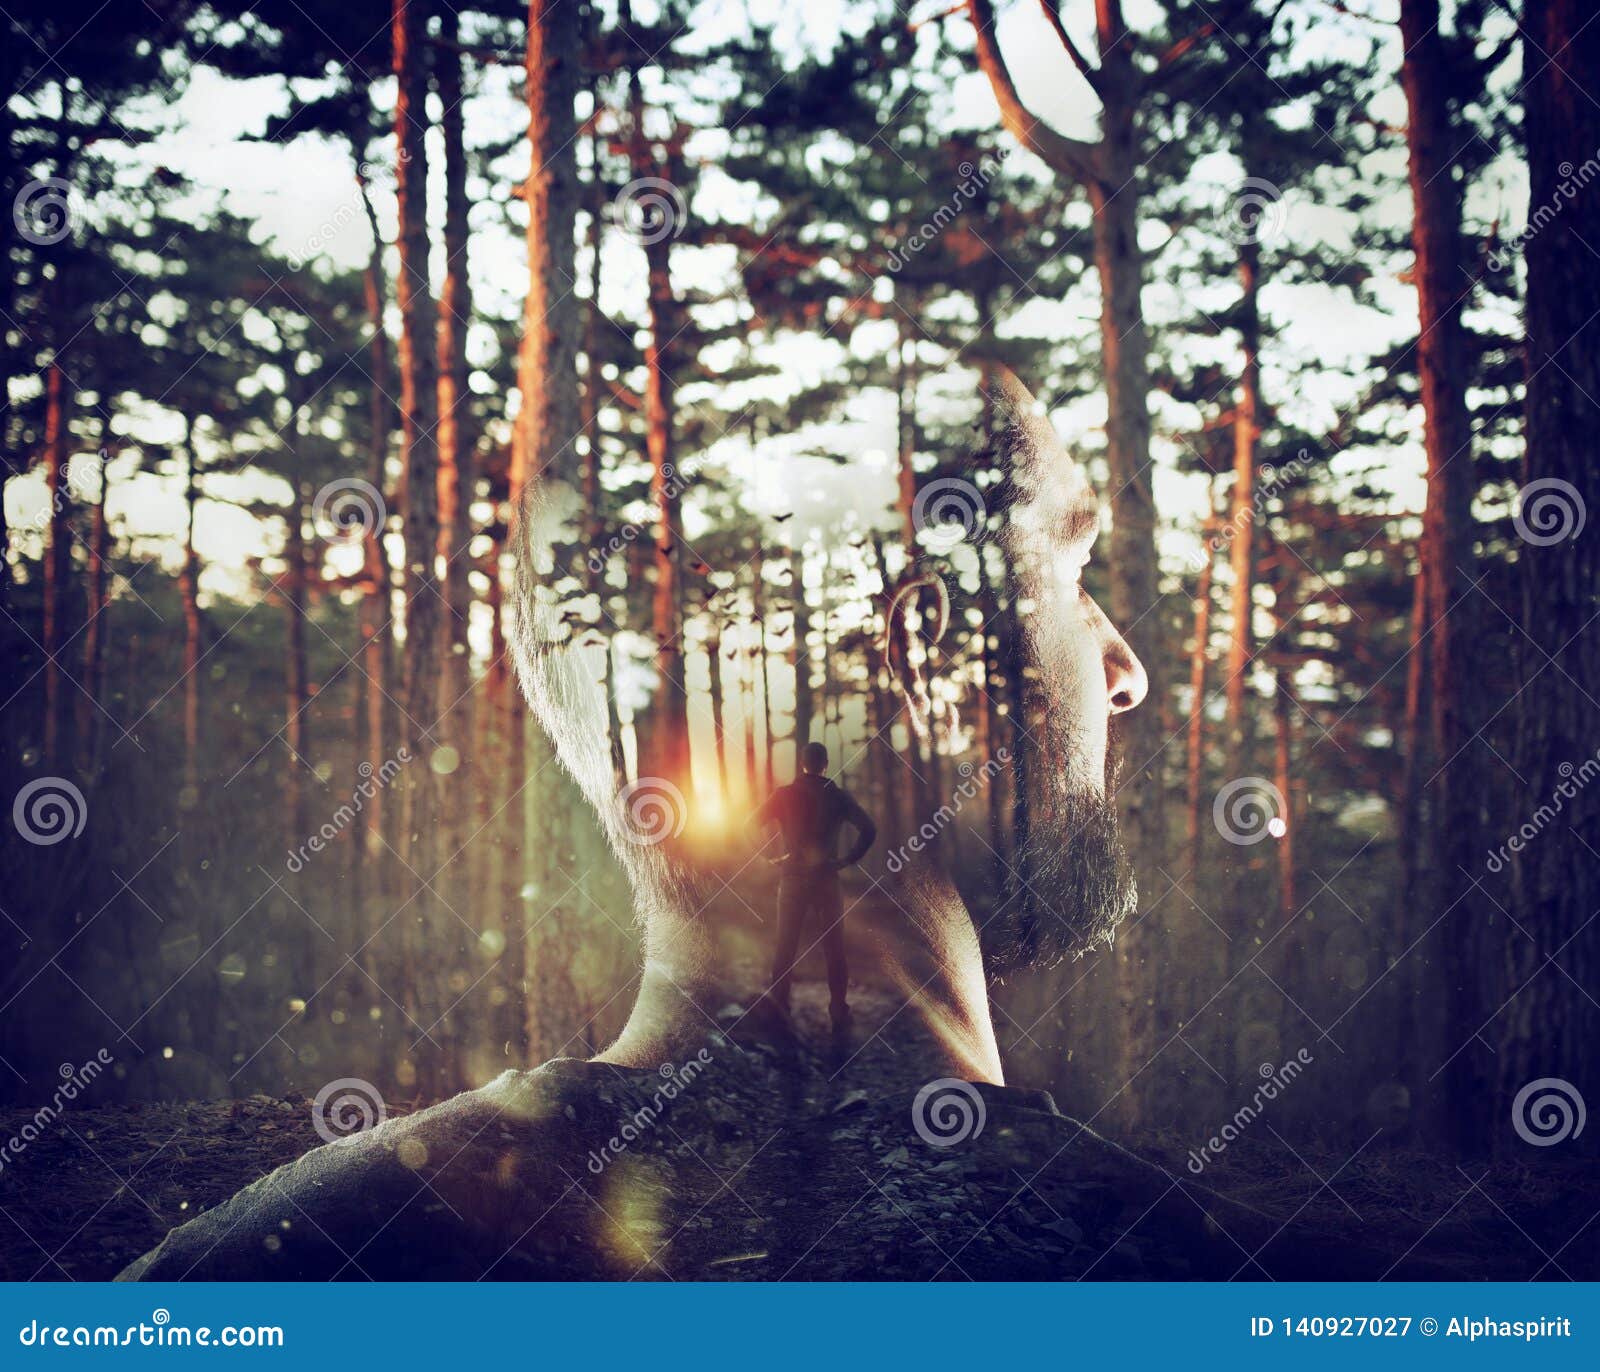 boy with himself in mind in a forest. double exposure